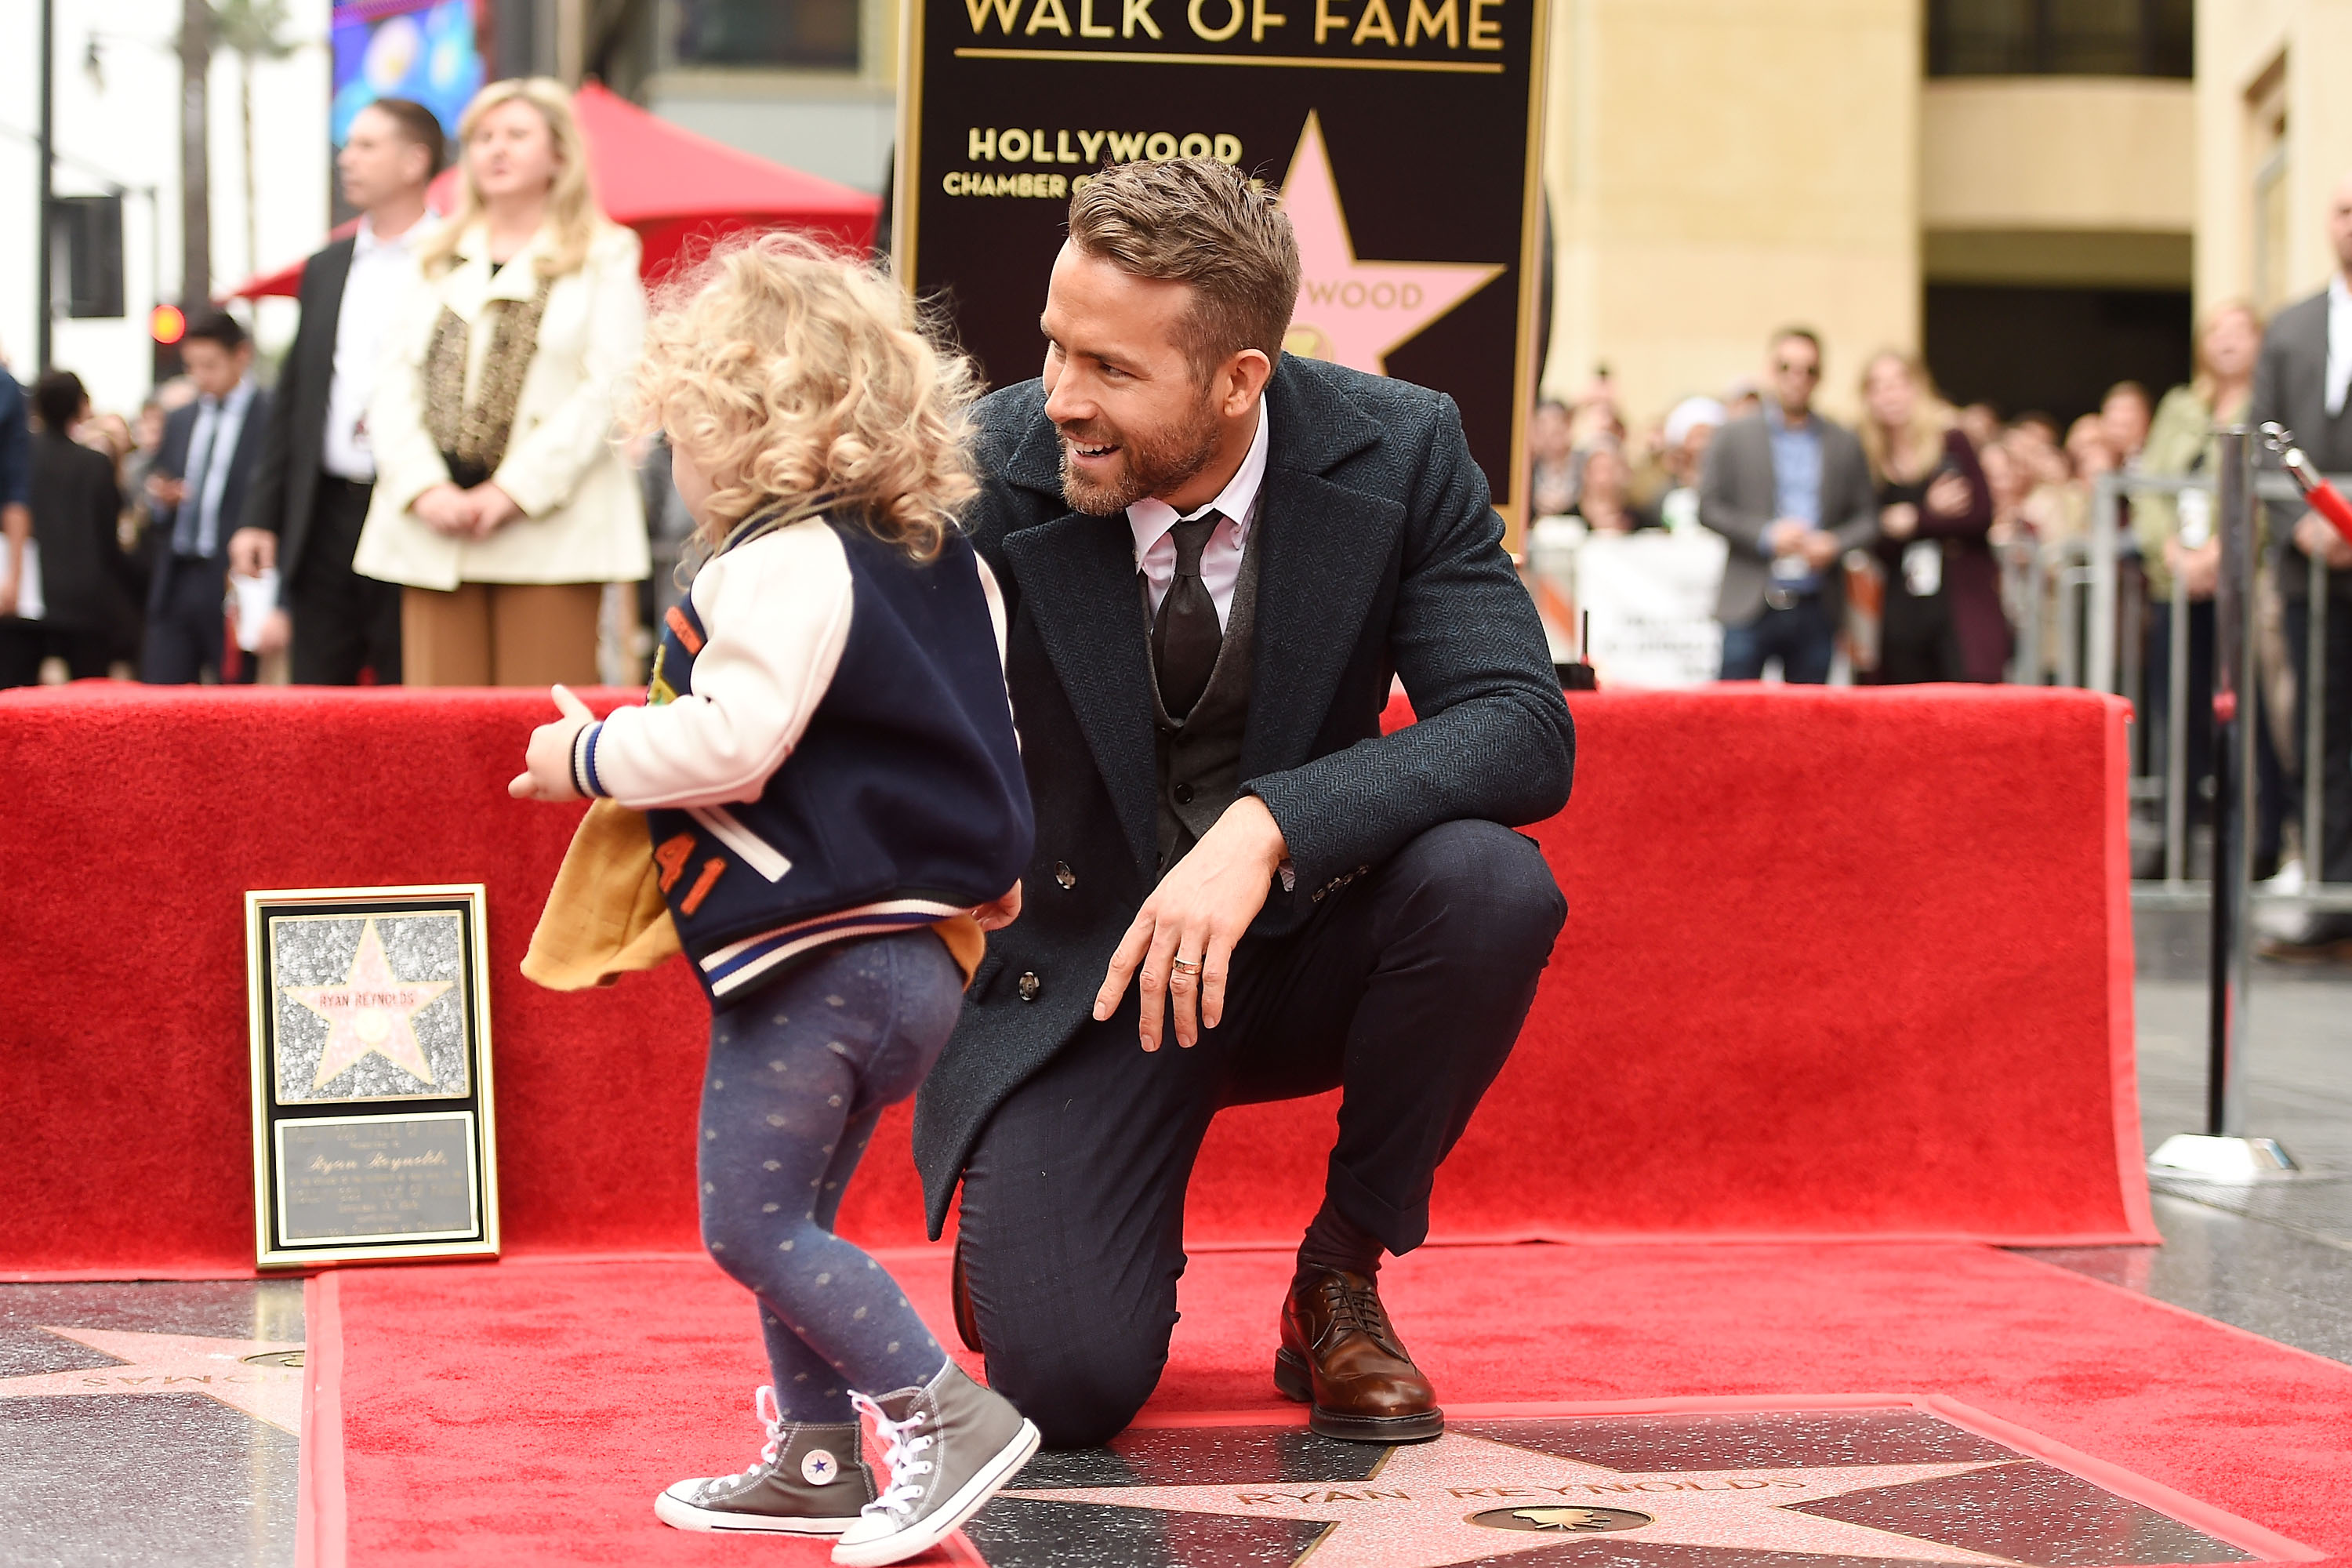 Ryan Reynolds with one of his daughters on December 15, 2016 | Source: Getty Images